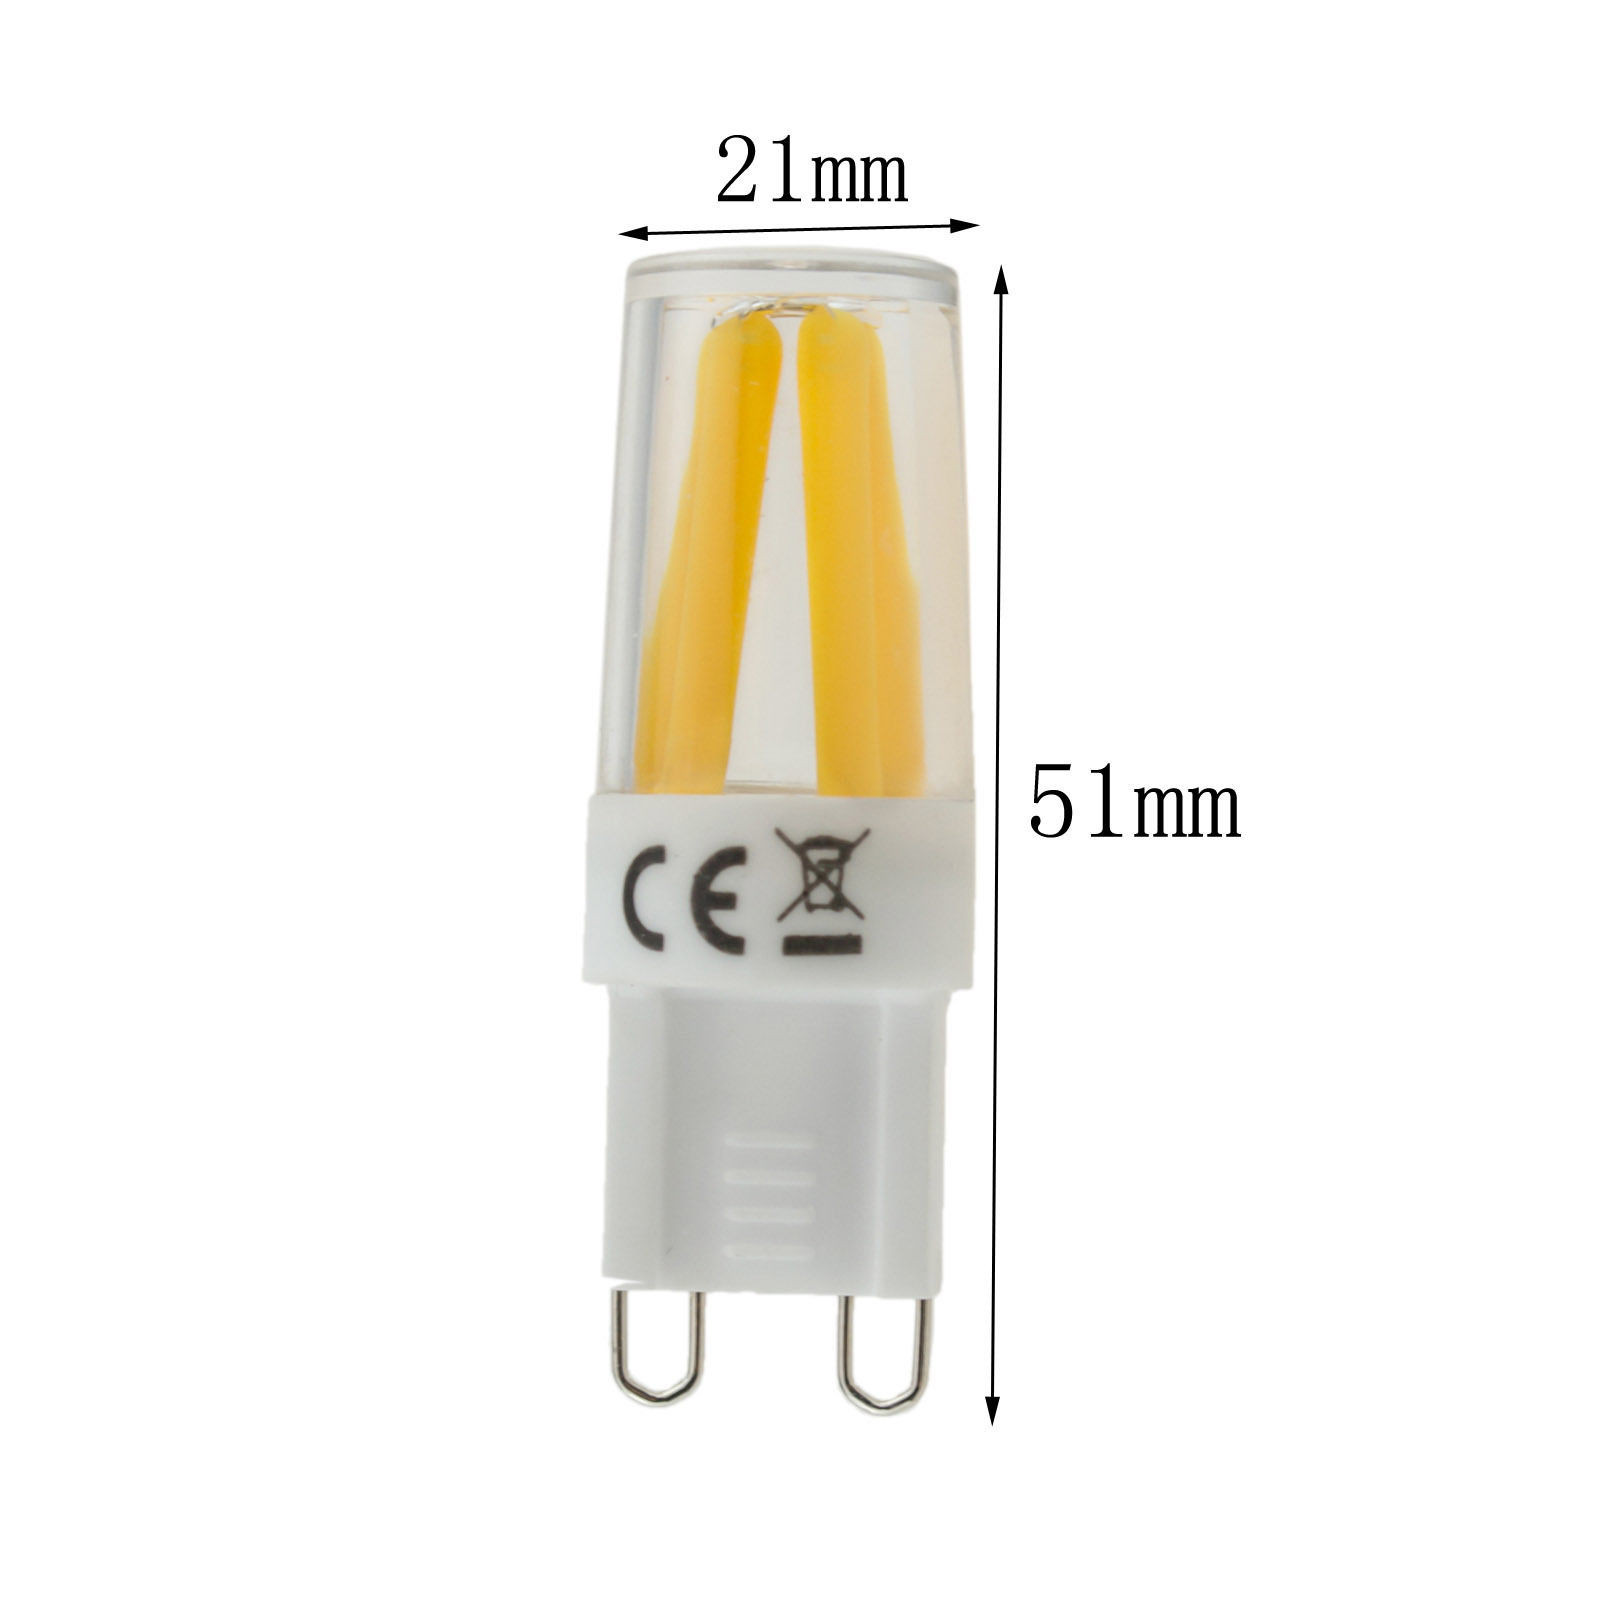 2W-G9-Dimmable-LED-Pure-White-Warm-White-Corn-Bulb-Silicone-Crystal-COB-Lamp-Light-AC-220V-1292383-7